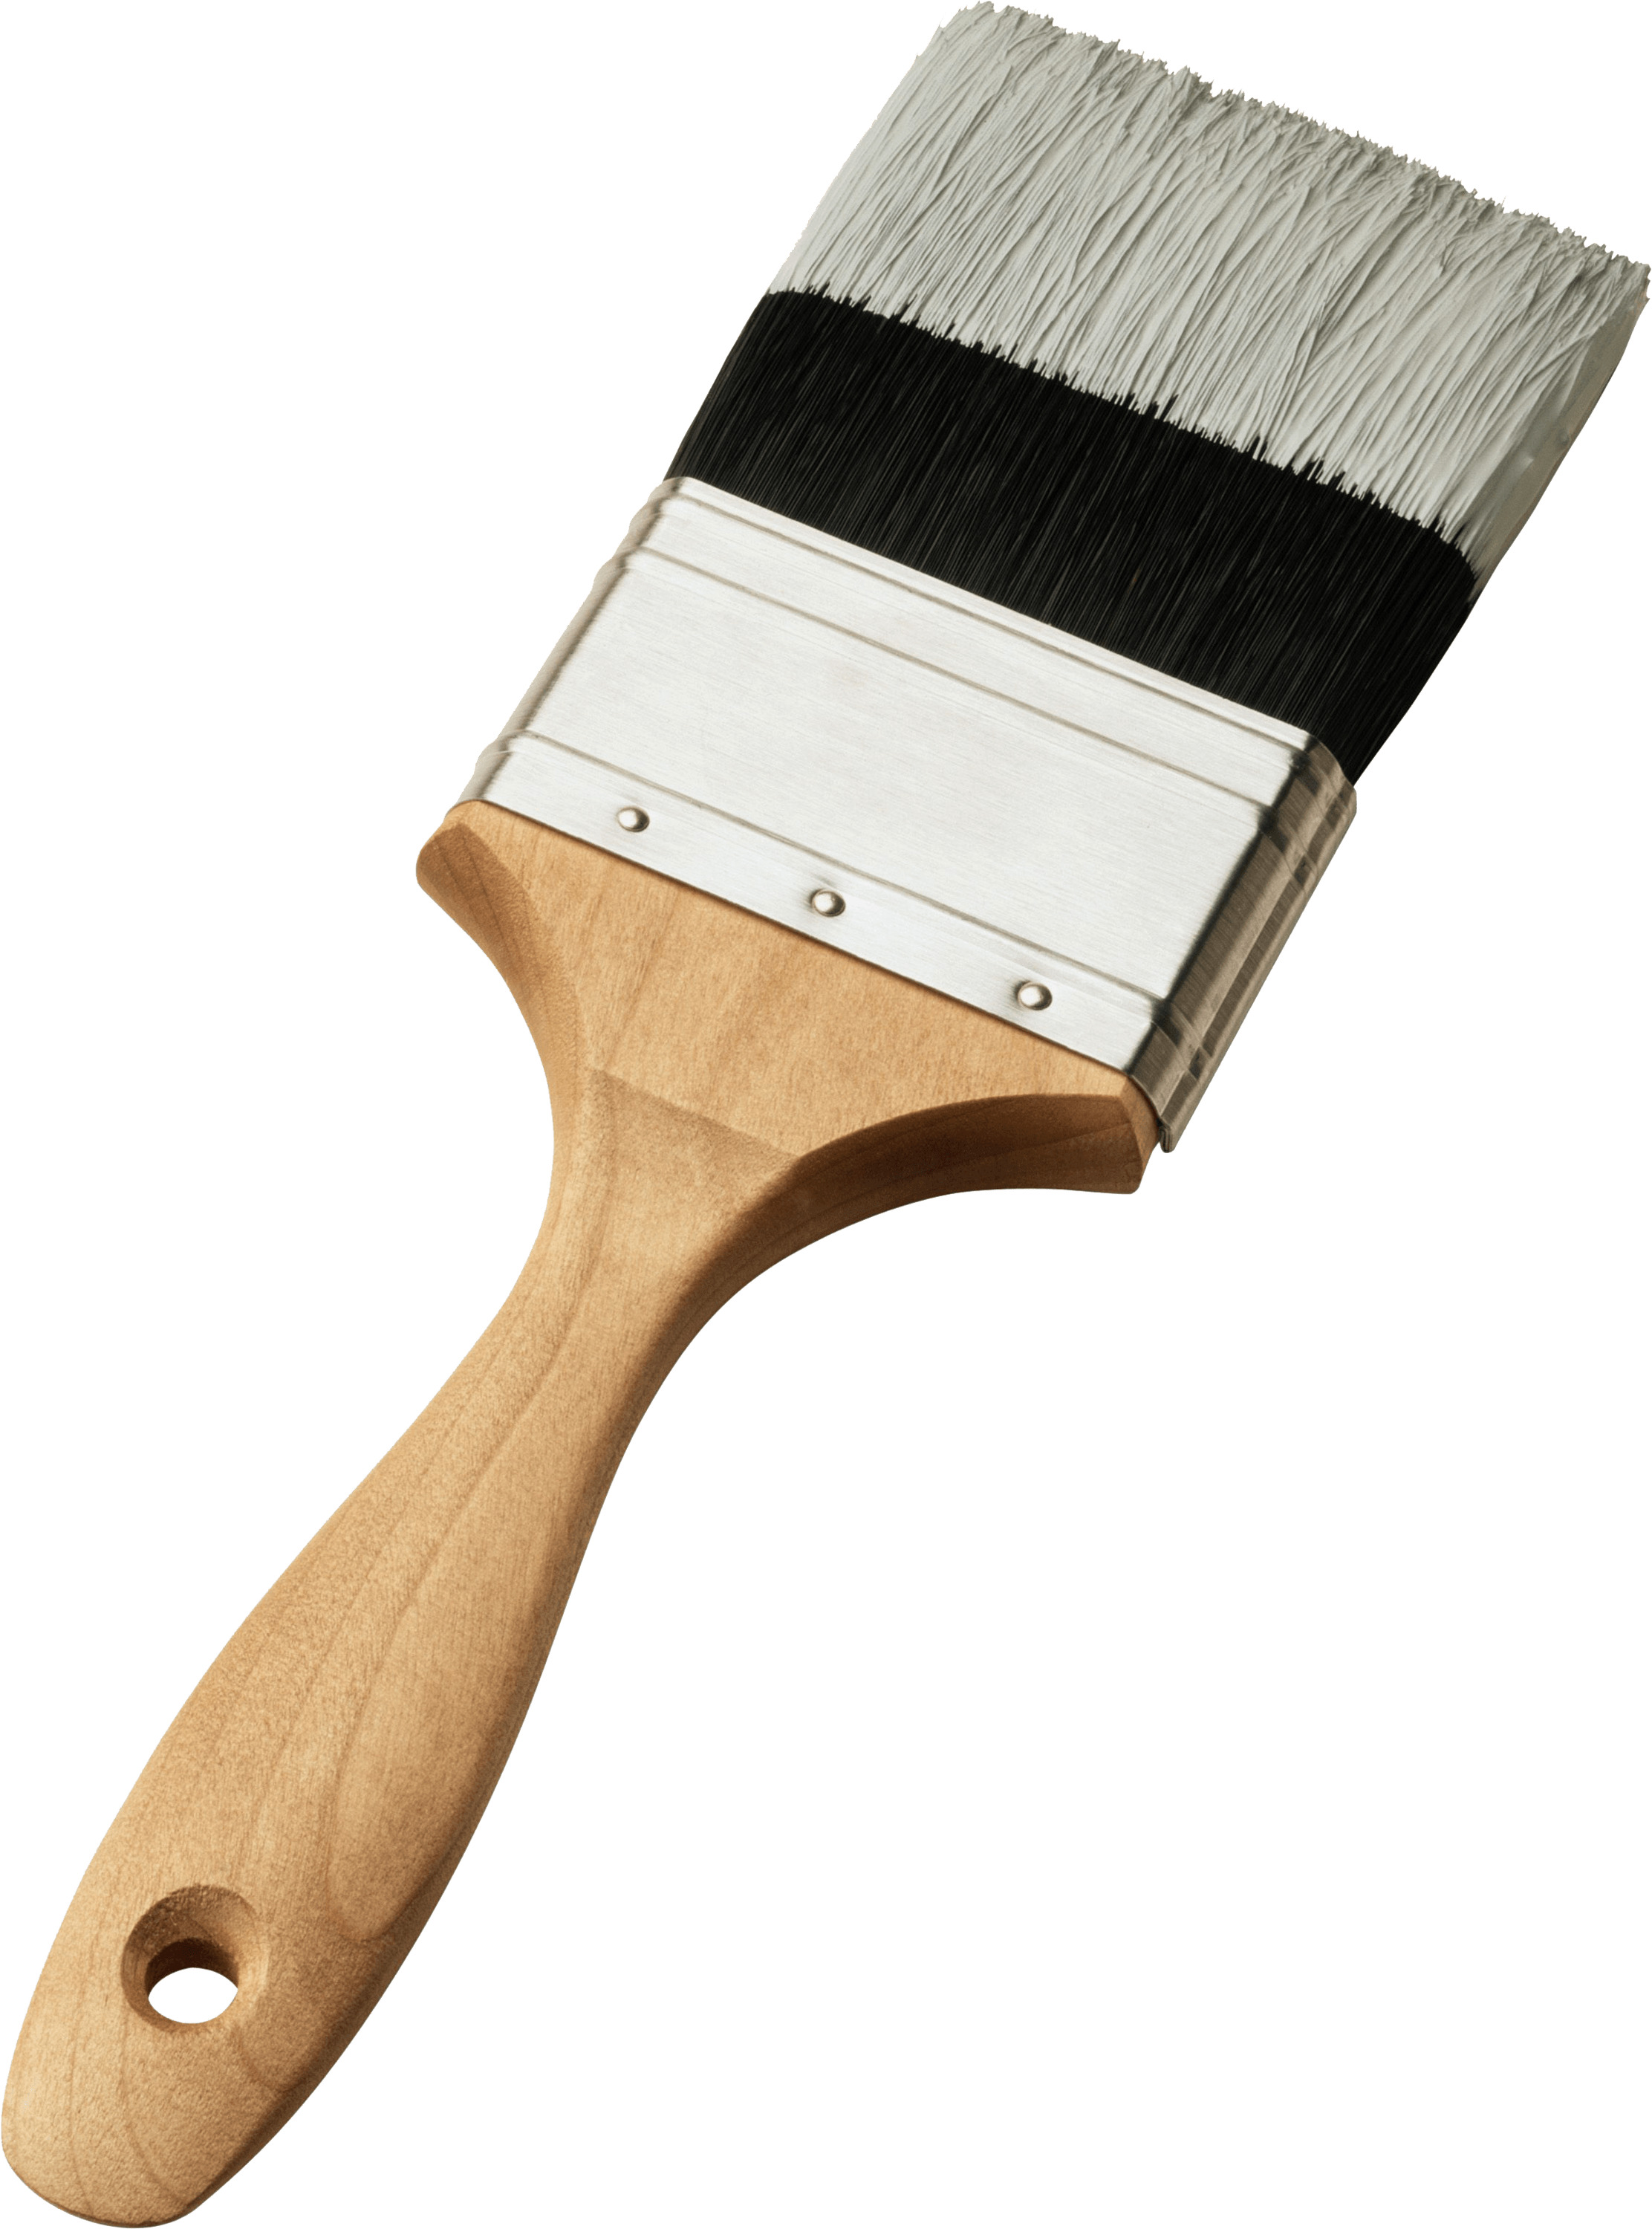 Brush Right png icons